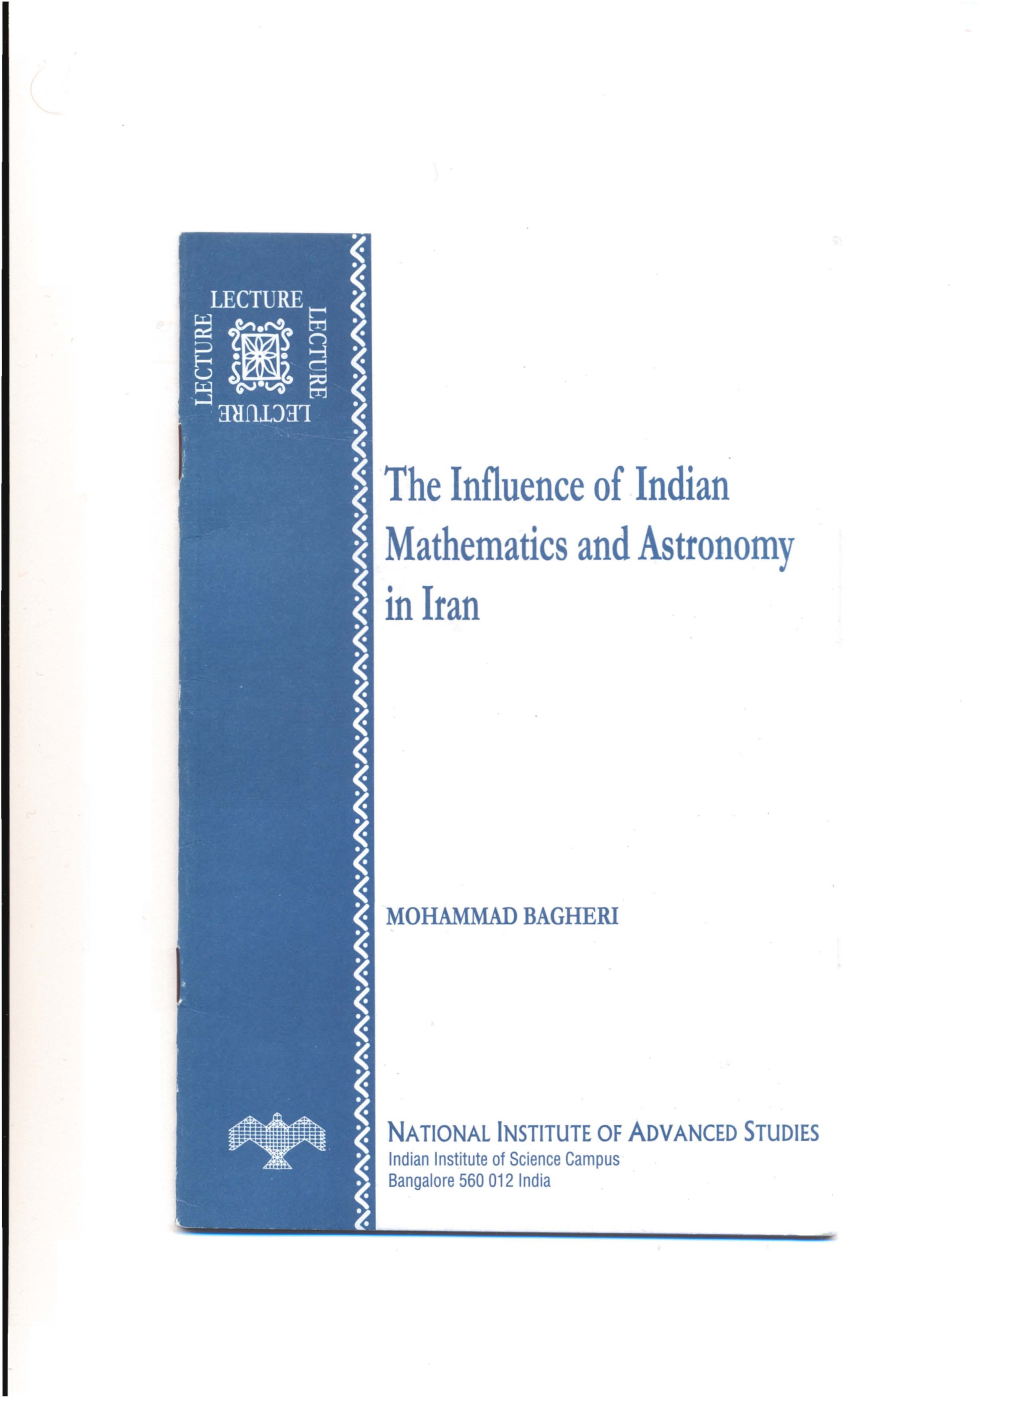 The Influence of Indian Mathematics and Astronomy in Iran